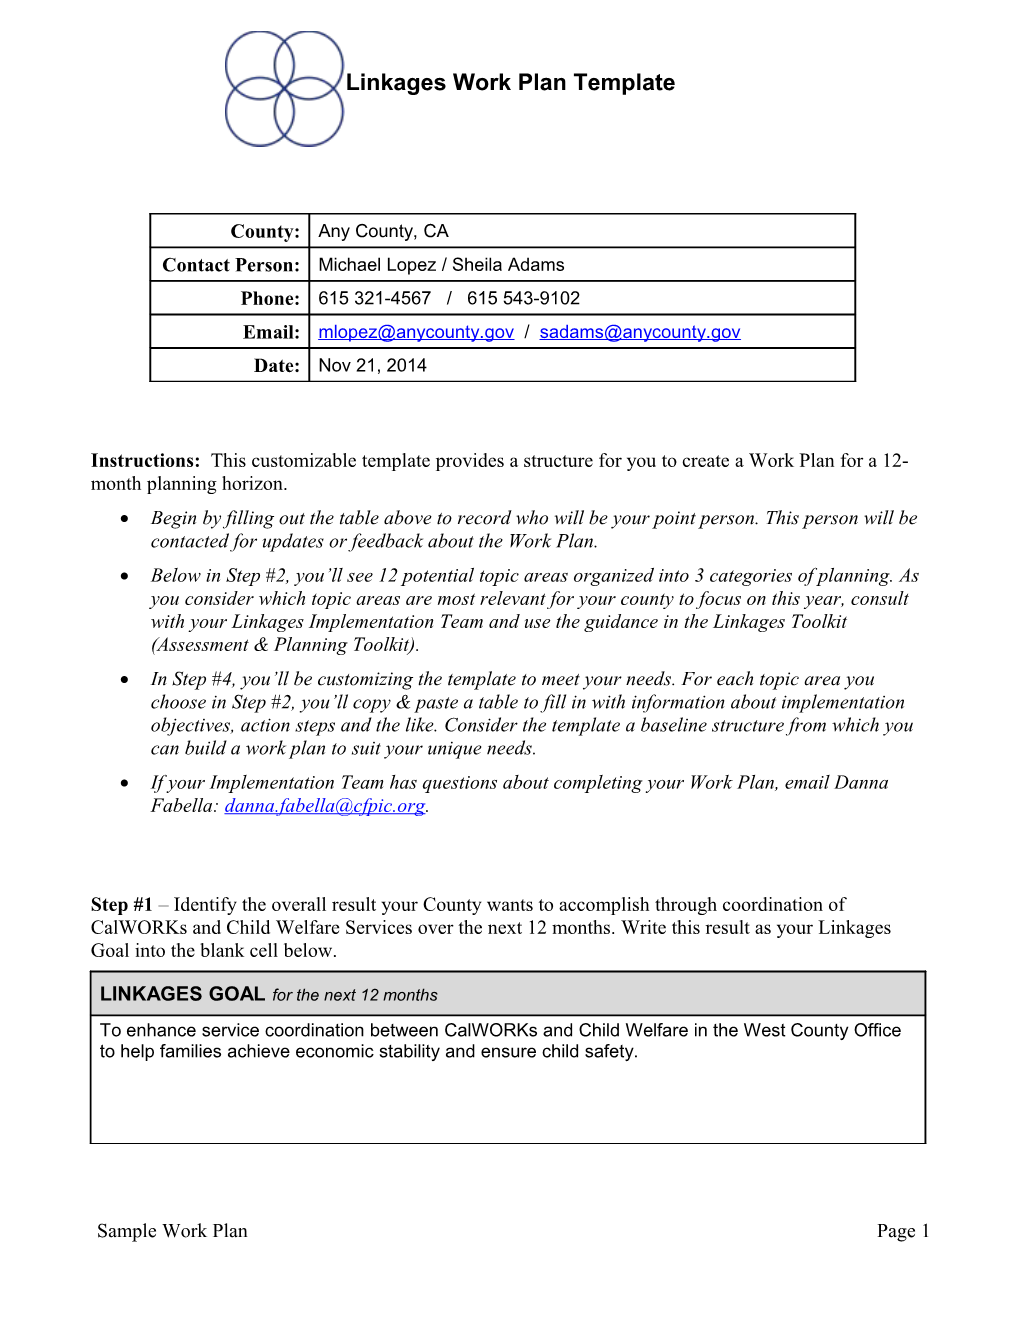 Linkages Work Plan Template